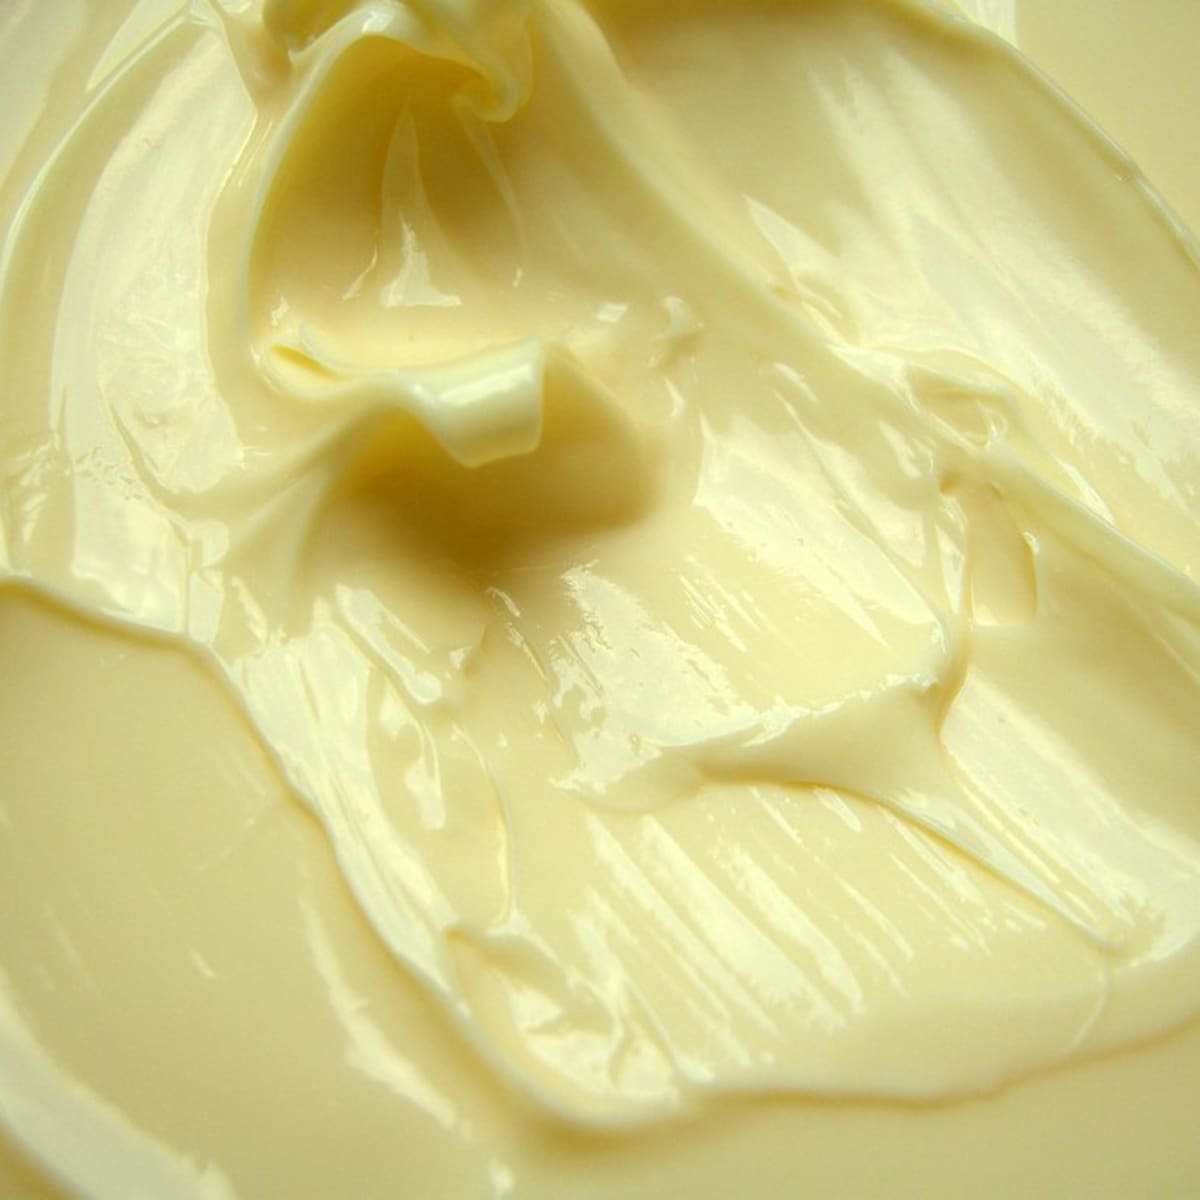 The Ultimate Body Butter Recipe pic